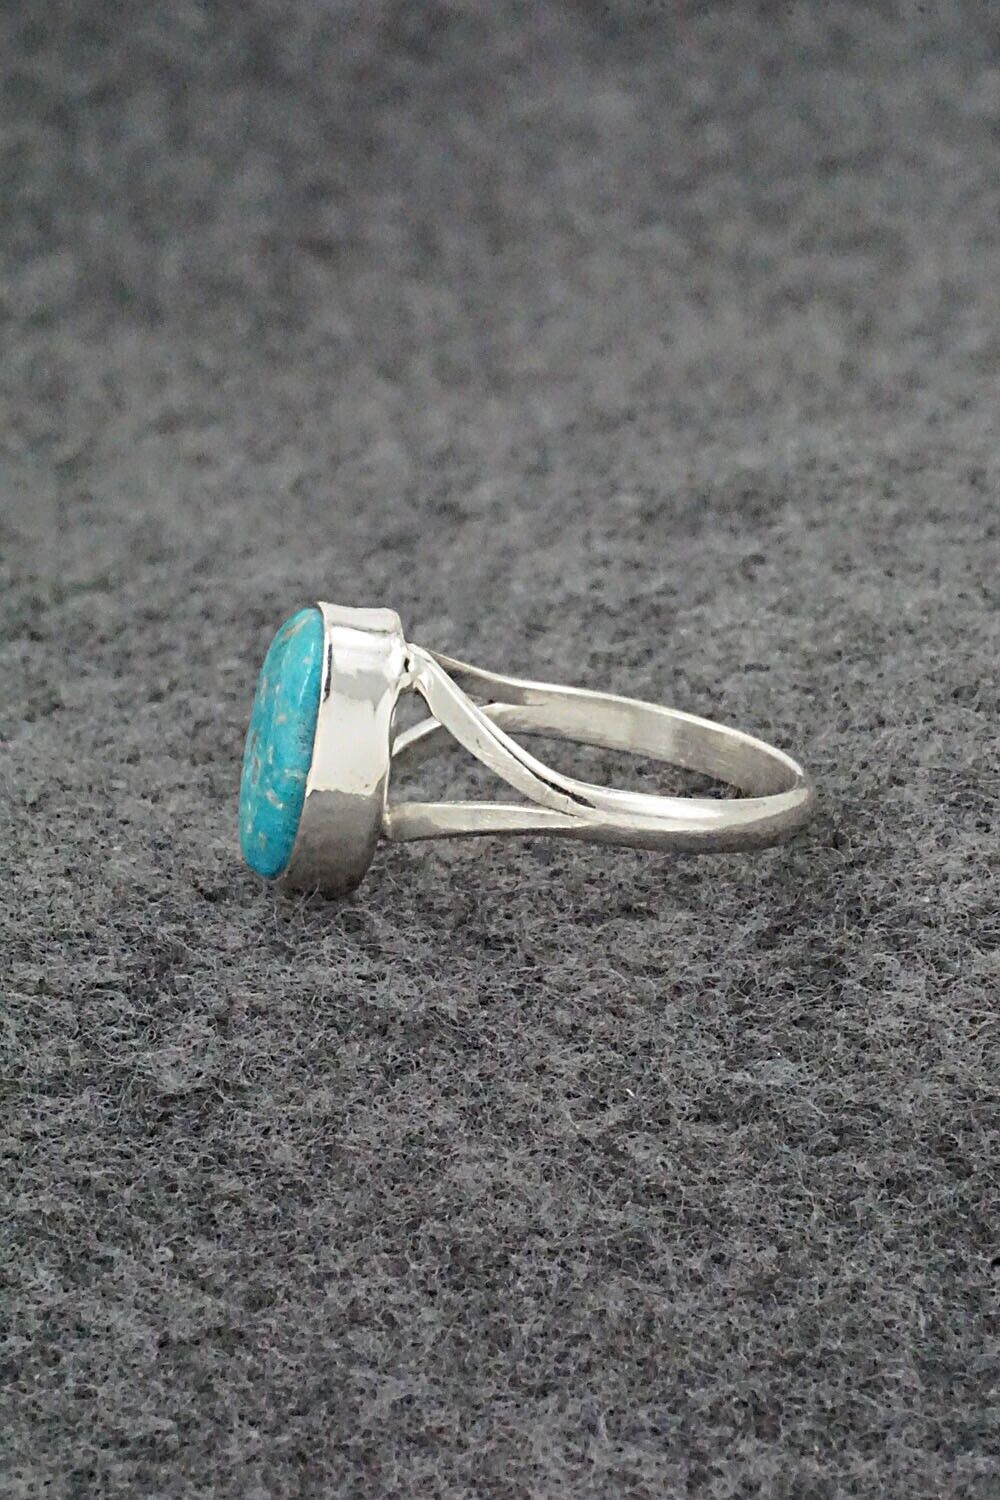 Turquoise & Sterling Silver Ring - Theresa Smith - Size 7.5